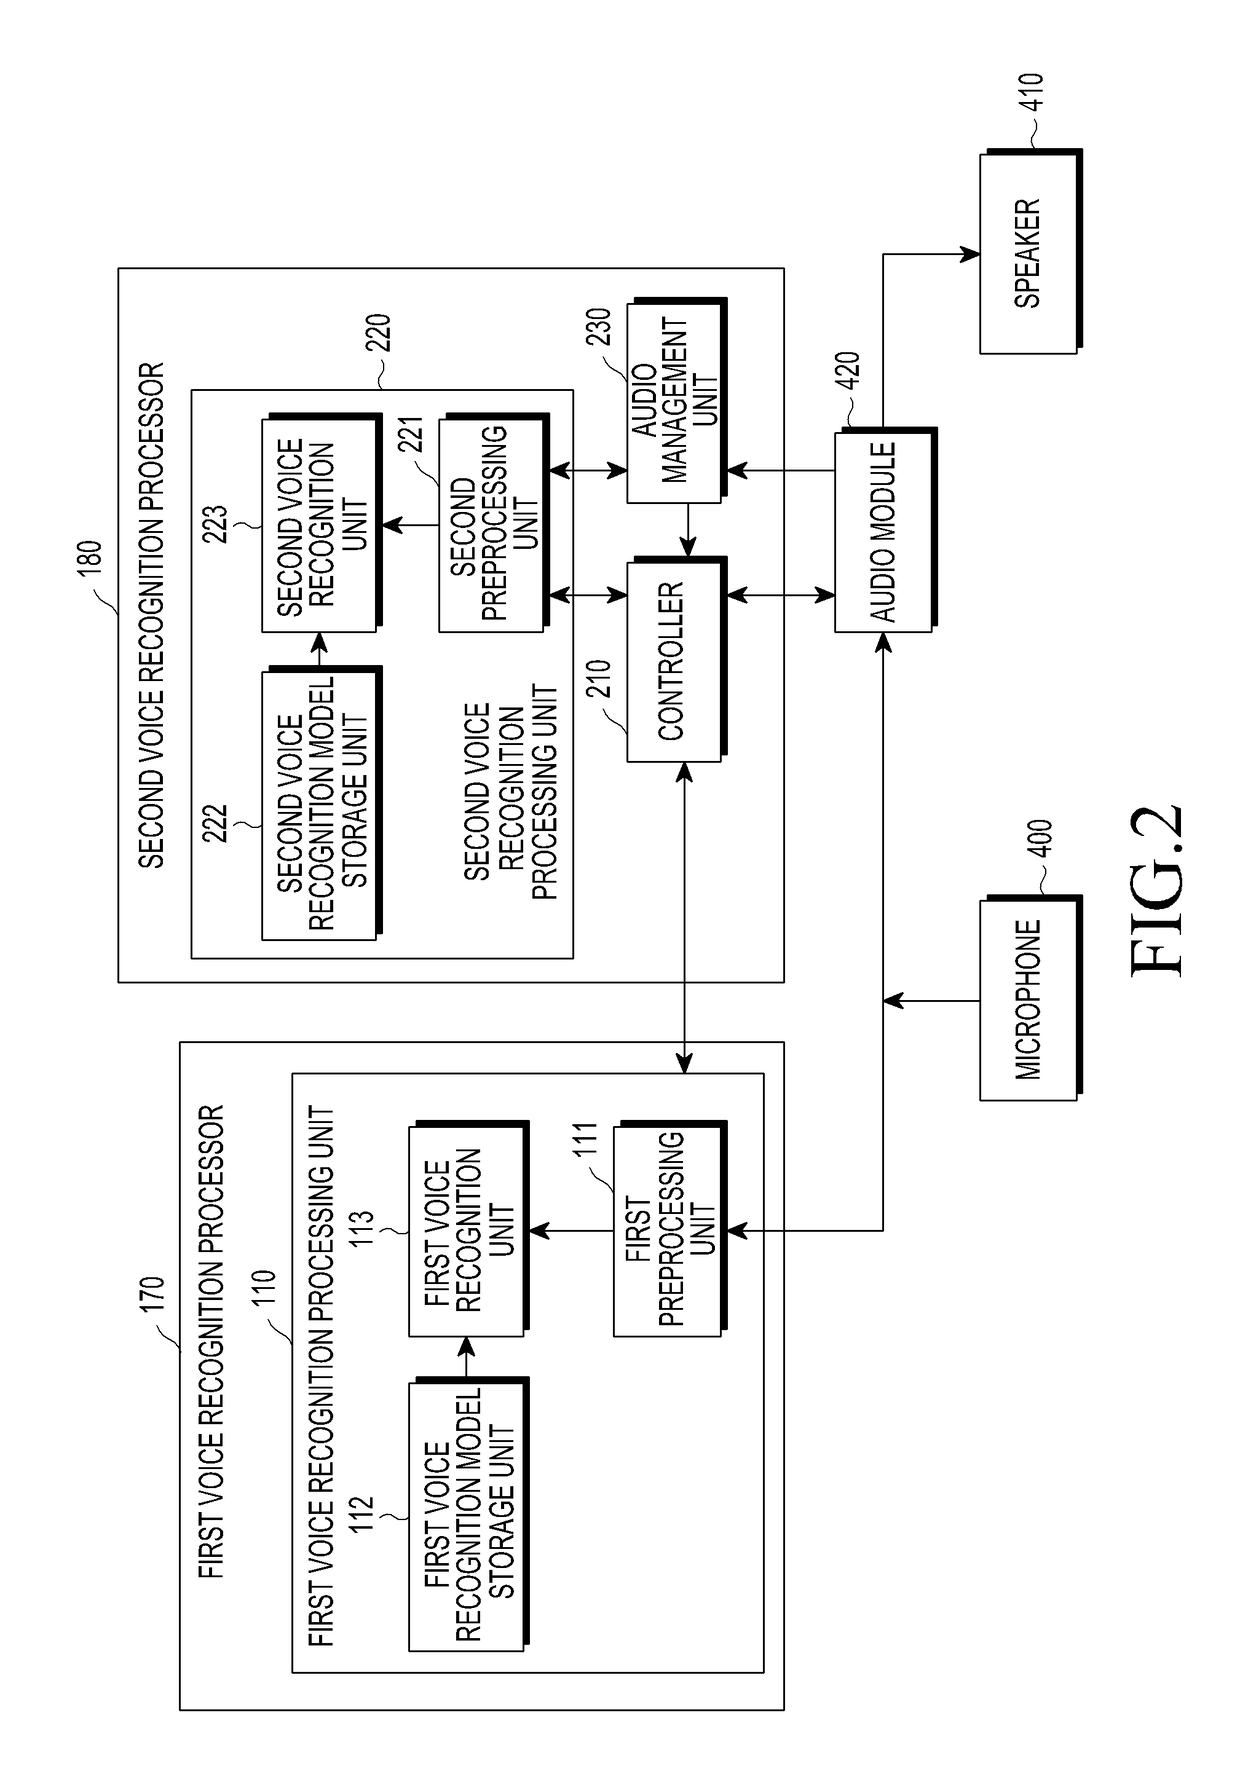 Electronic device and method for voice recognition using a plurality of voice recognition engines